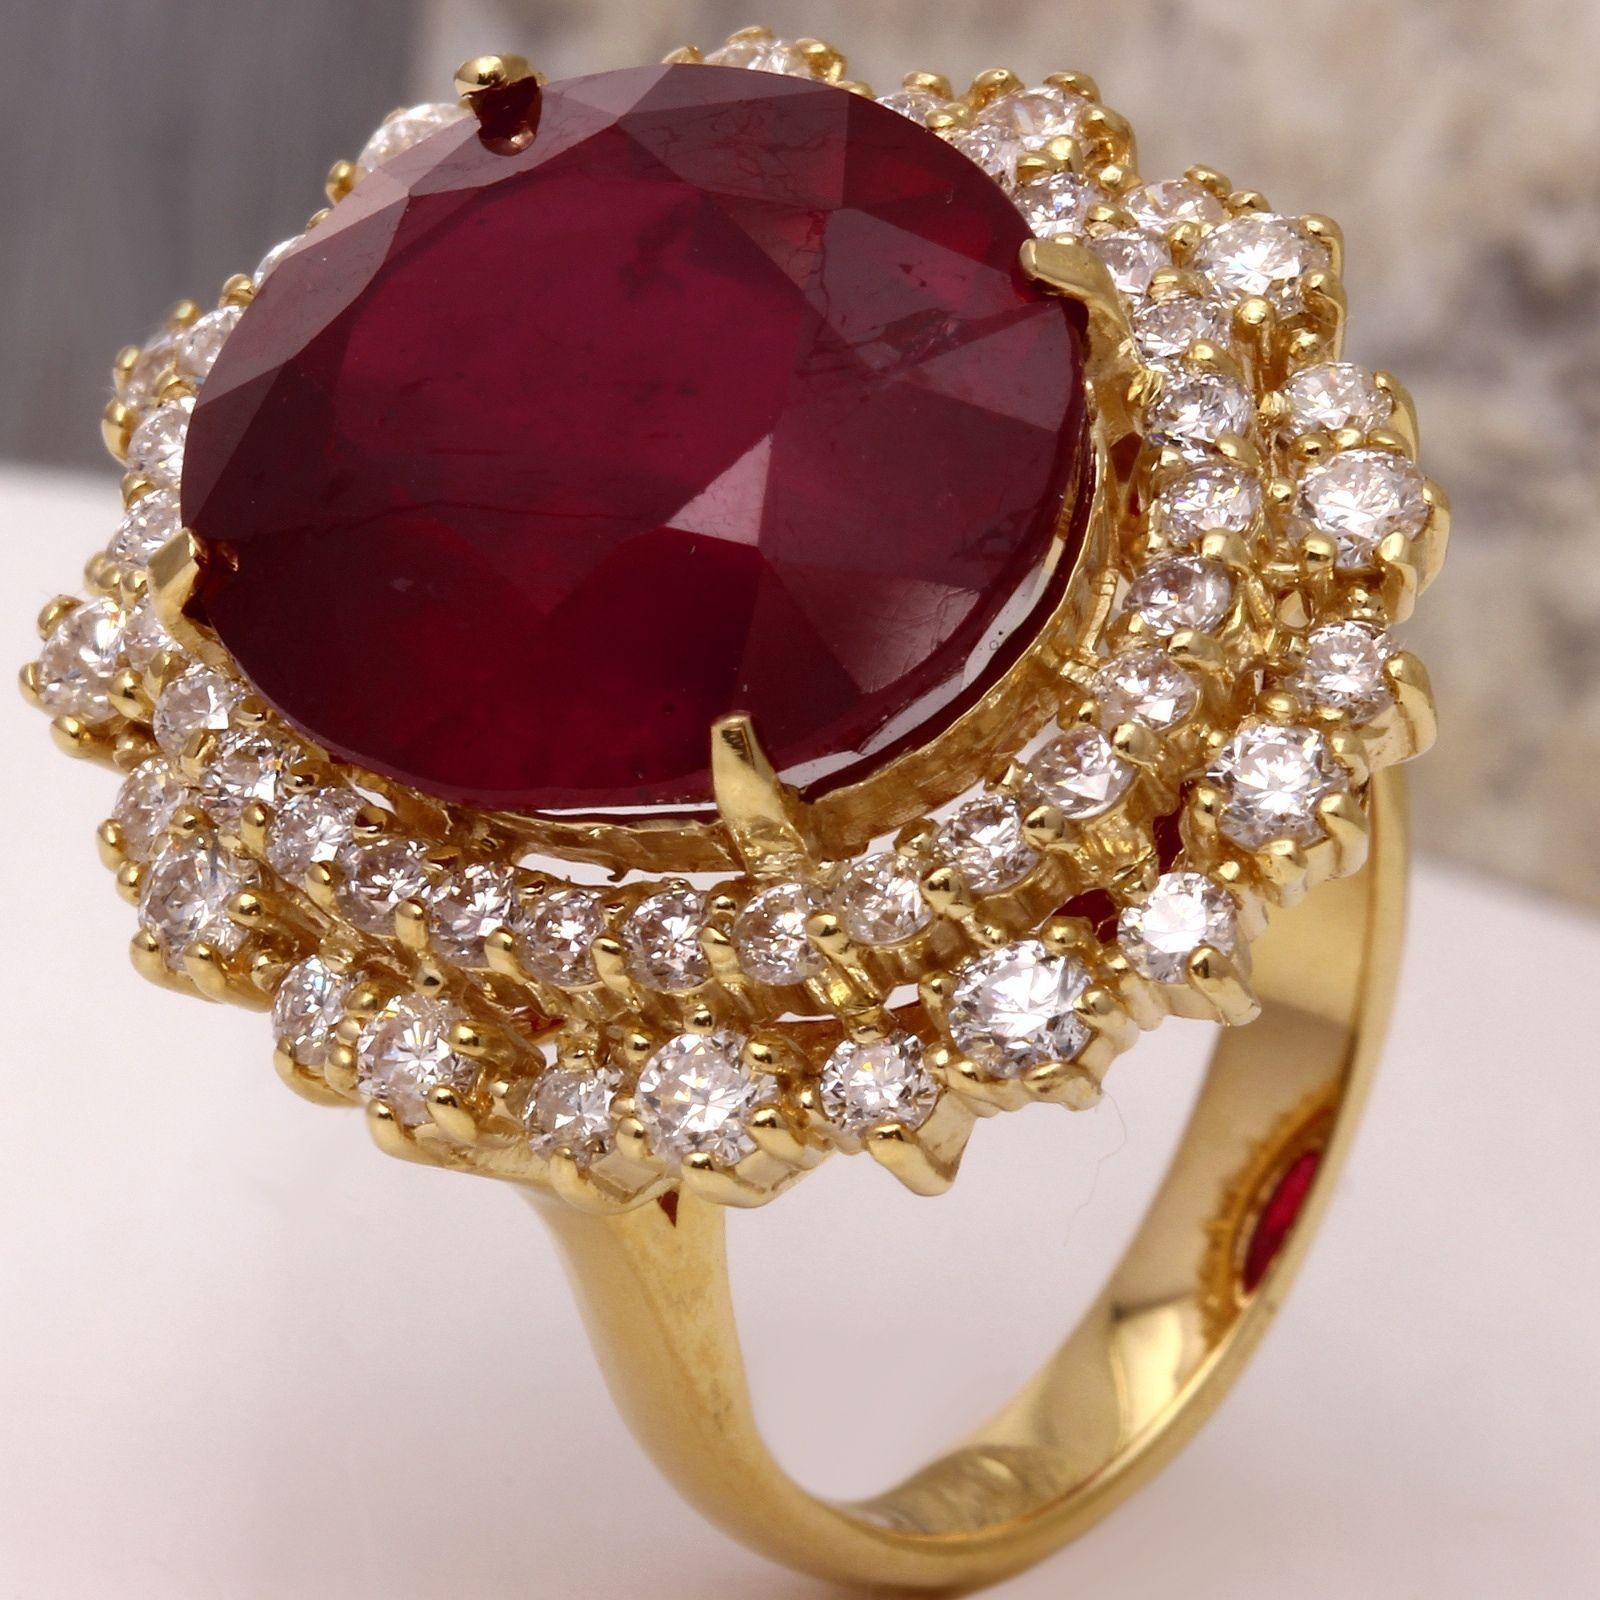 19.26 Carat Impressive Red Ruby and Diamond 14 Karat Yellow Gold Ring In New Condition For Sale In Los Angeles, CA